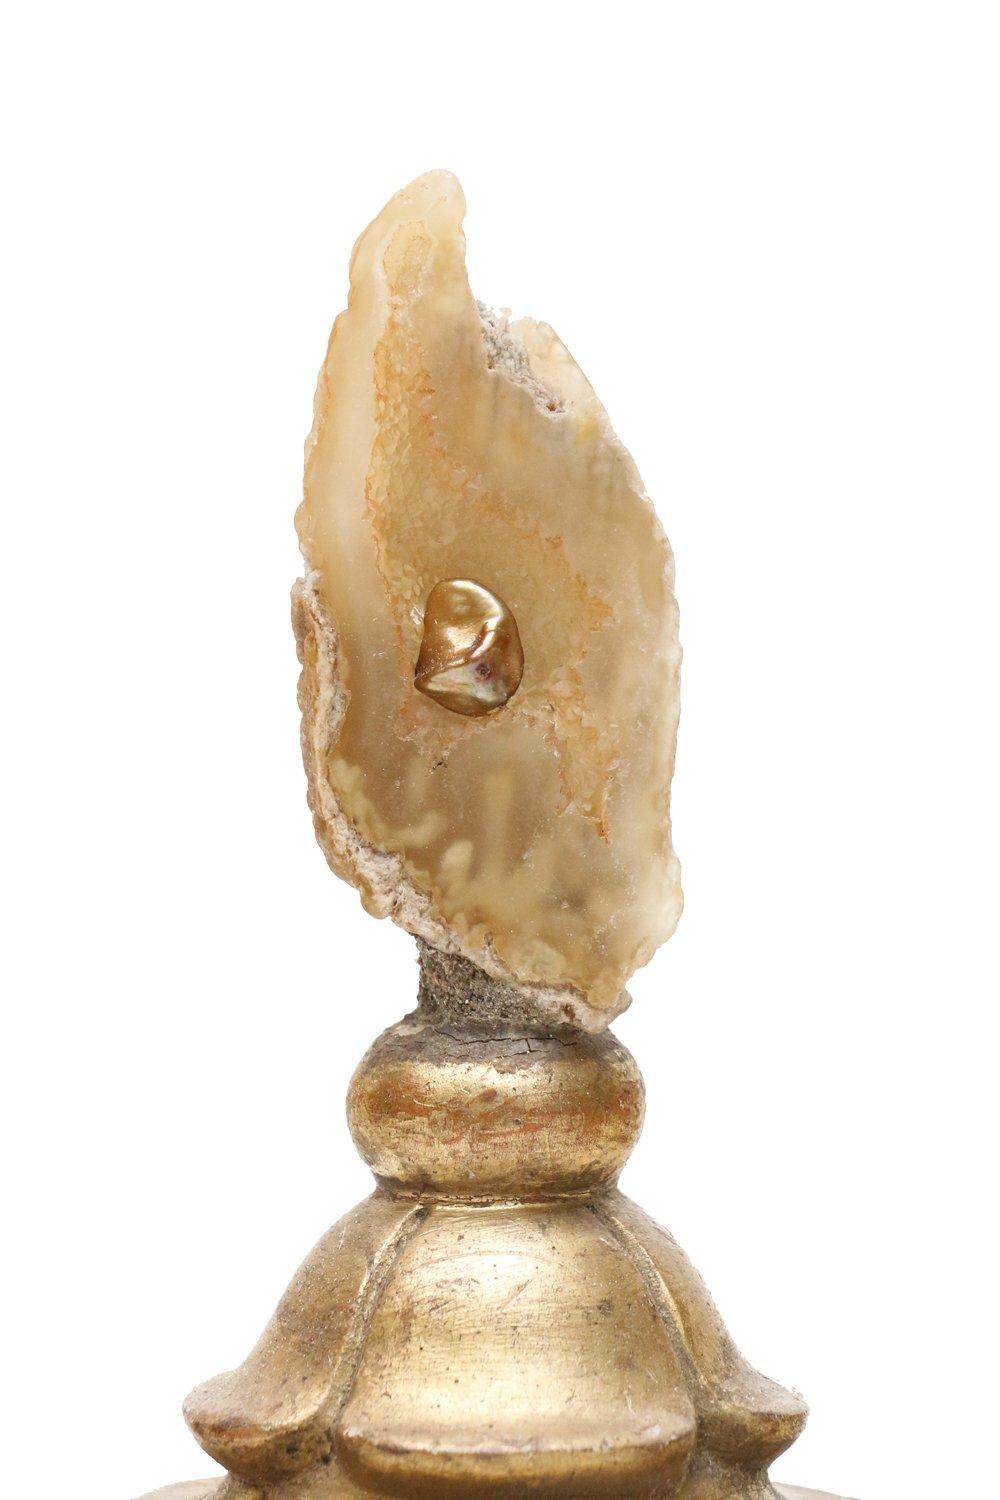 18th century Italian candlestick top with polished fossil agate coral with a natural forming Baroque pearl.

The 18th century candlestick top originally came from a candlestick from a church in Tuscany.
Agate coral is Florida's state stone and is